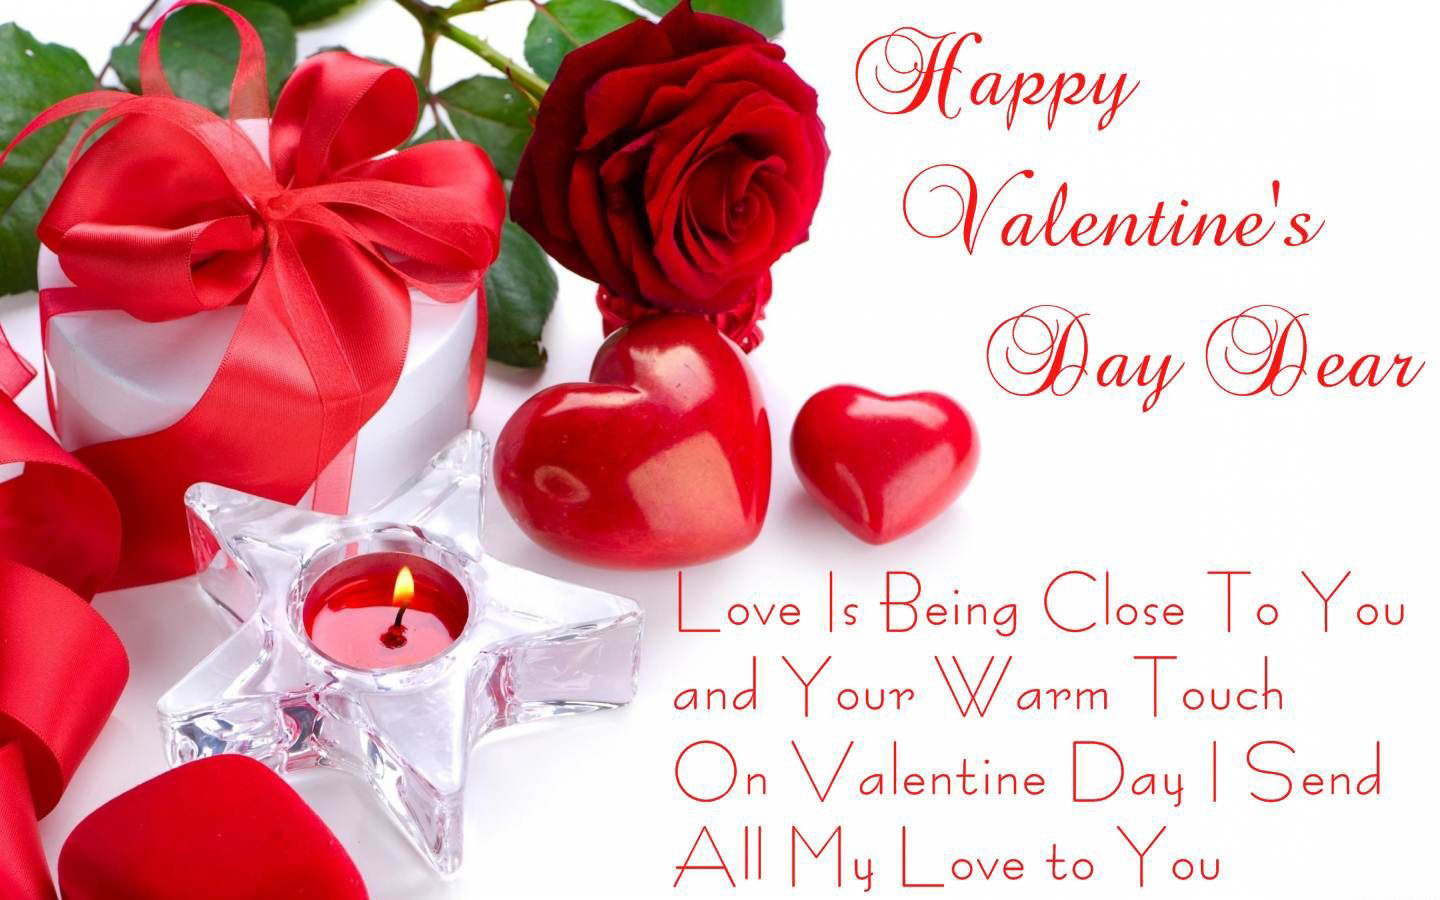 top-100-happy-valentines-day-wishes-images-quotes-messages-hd-wallpapers